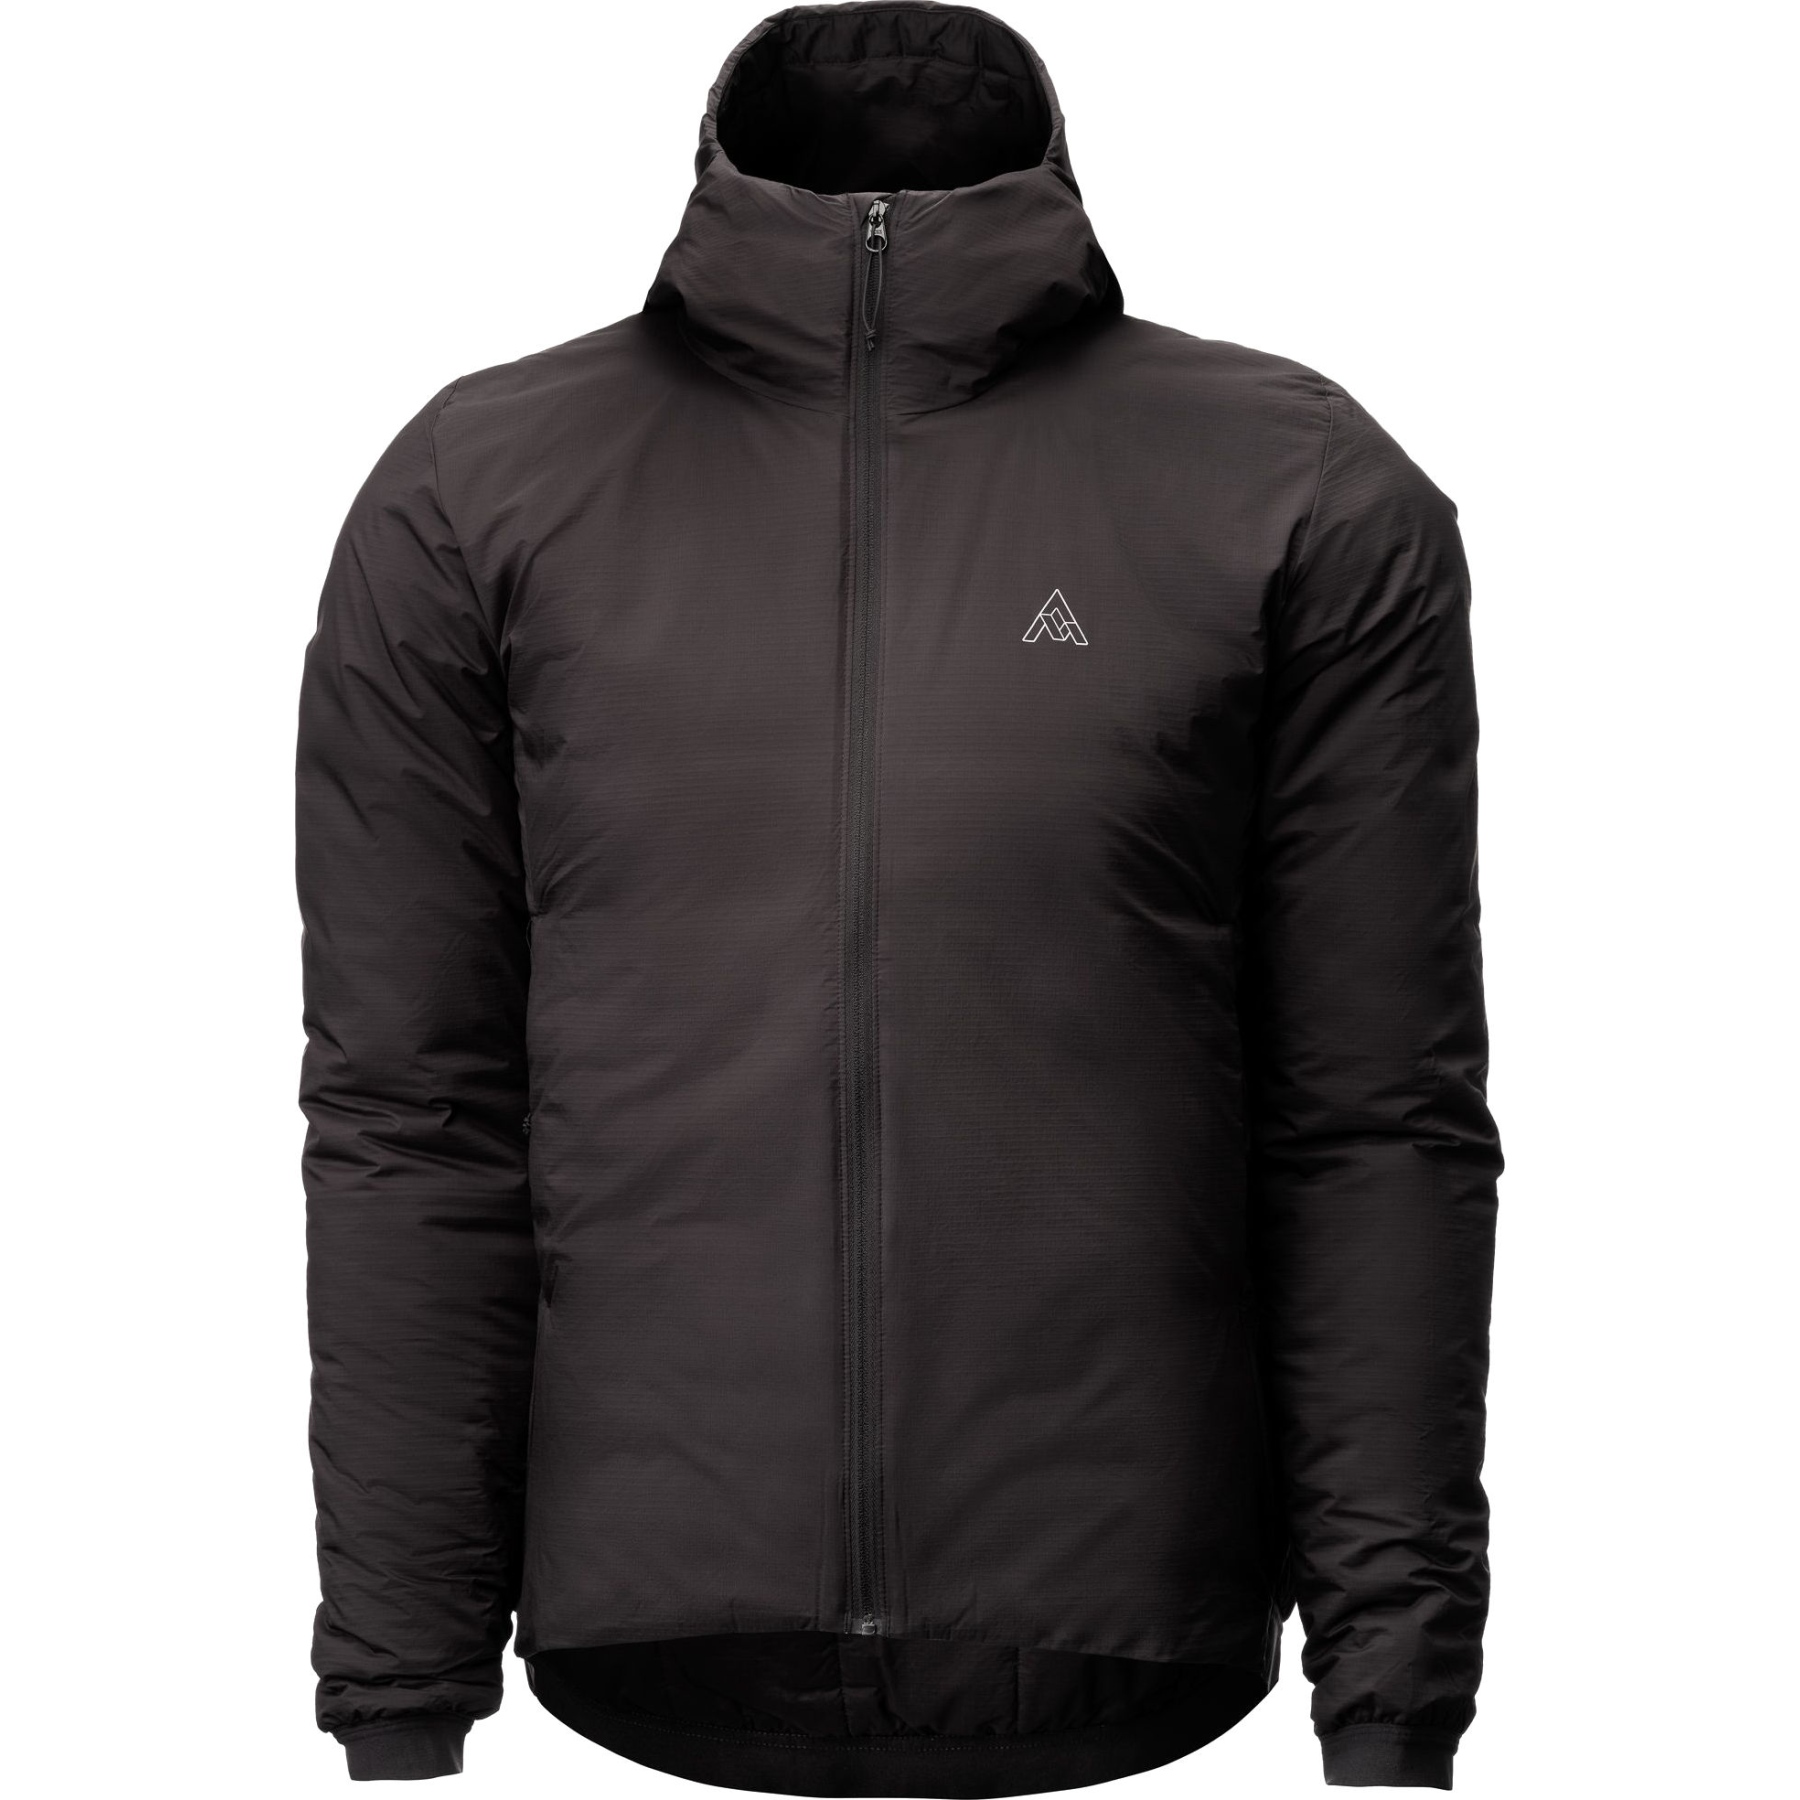 Picture of 7mesh Outflow Primaloft Hoody Jacket - Black